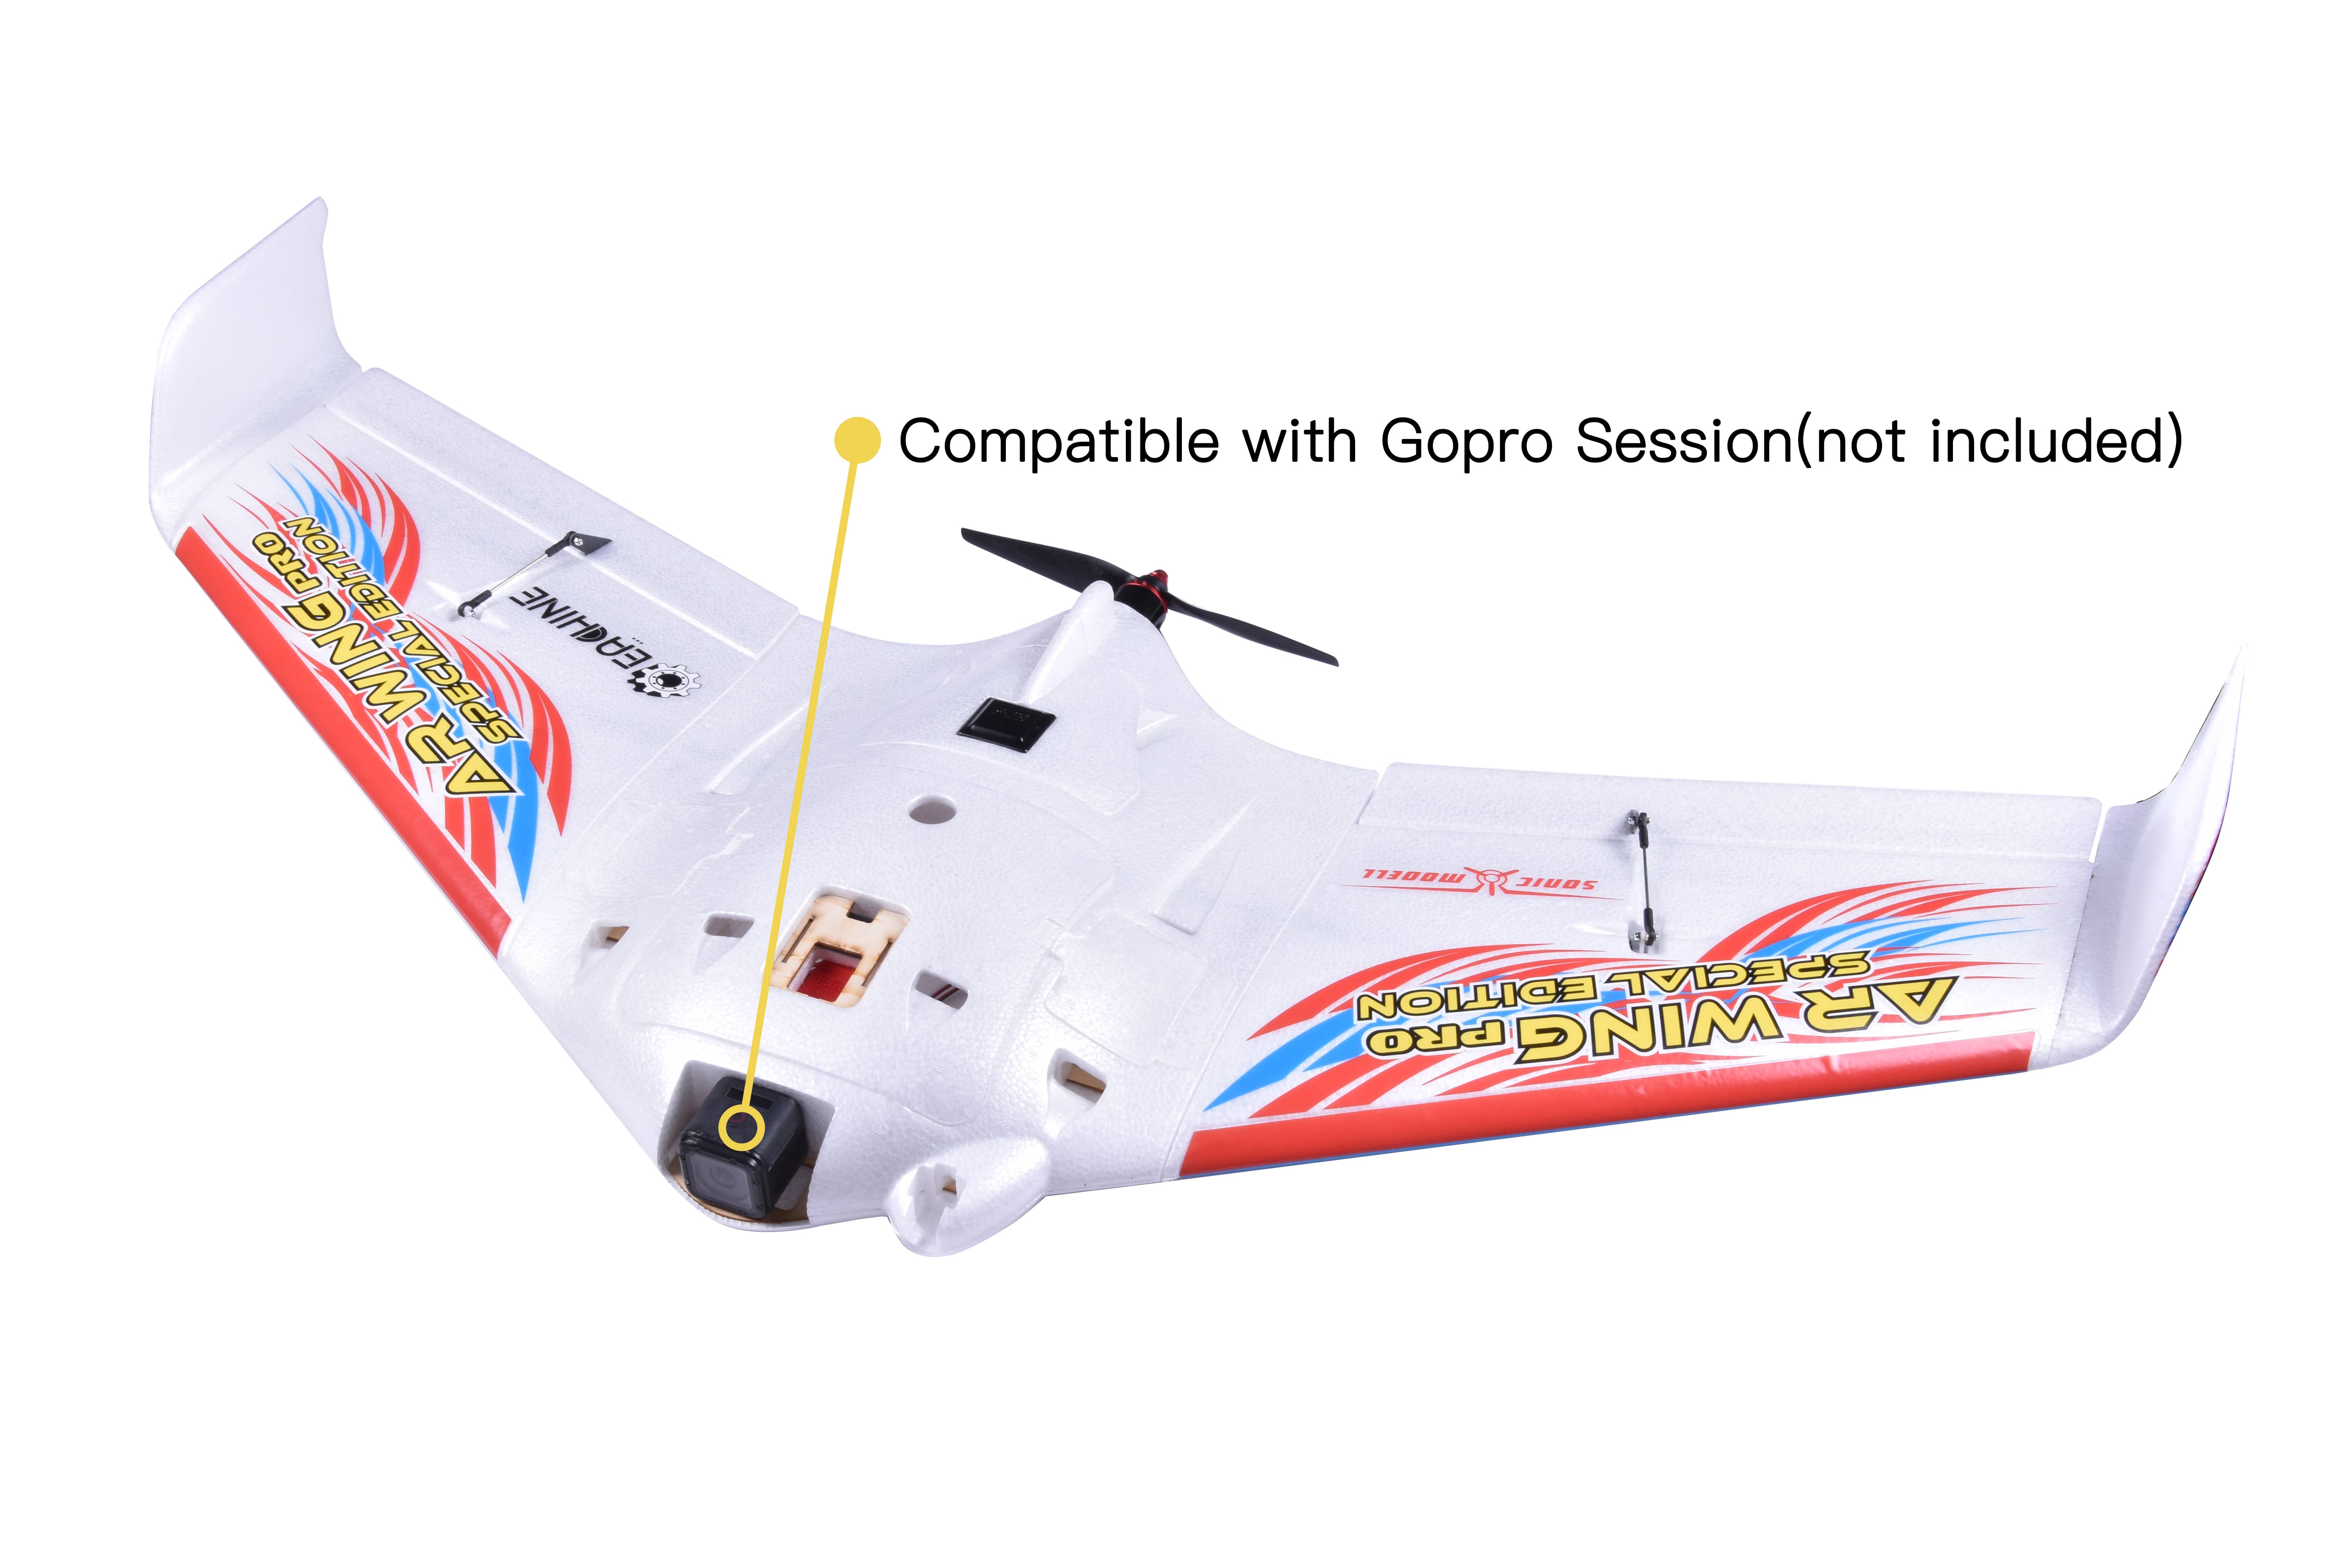 Eachine--Sonicmodell-AR-Wing-Pro-Special-Edition-1000mm-Wingspan-EPP-FPV-Flying-Wing-RC-Airplane-KIT-1857256-3